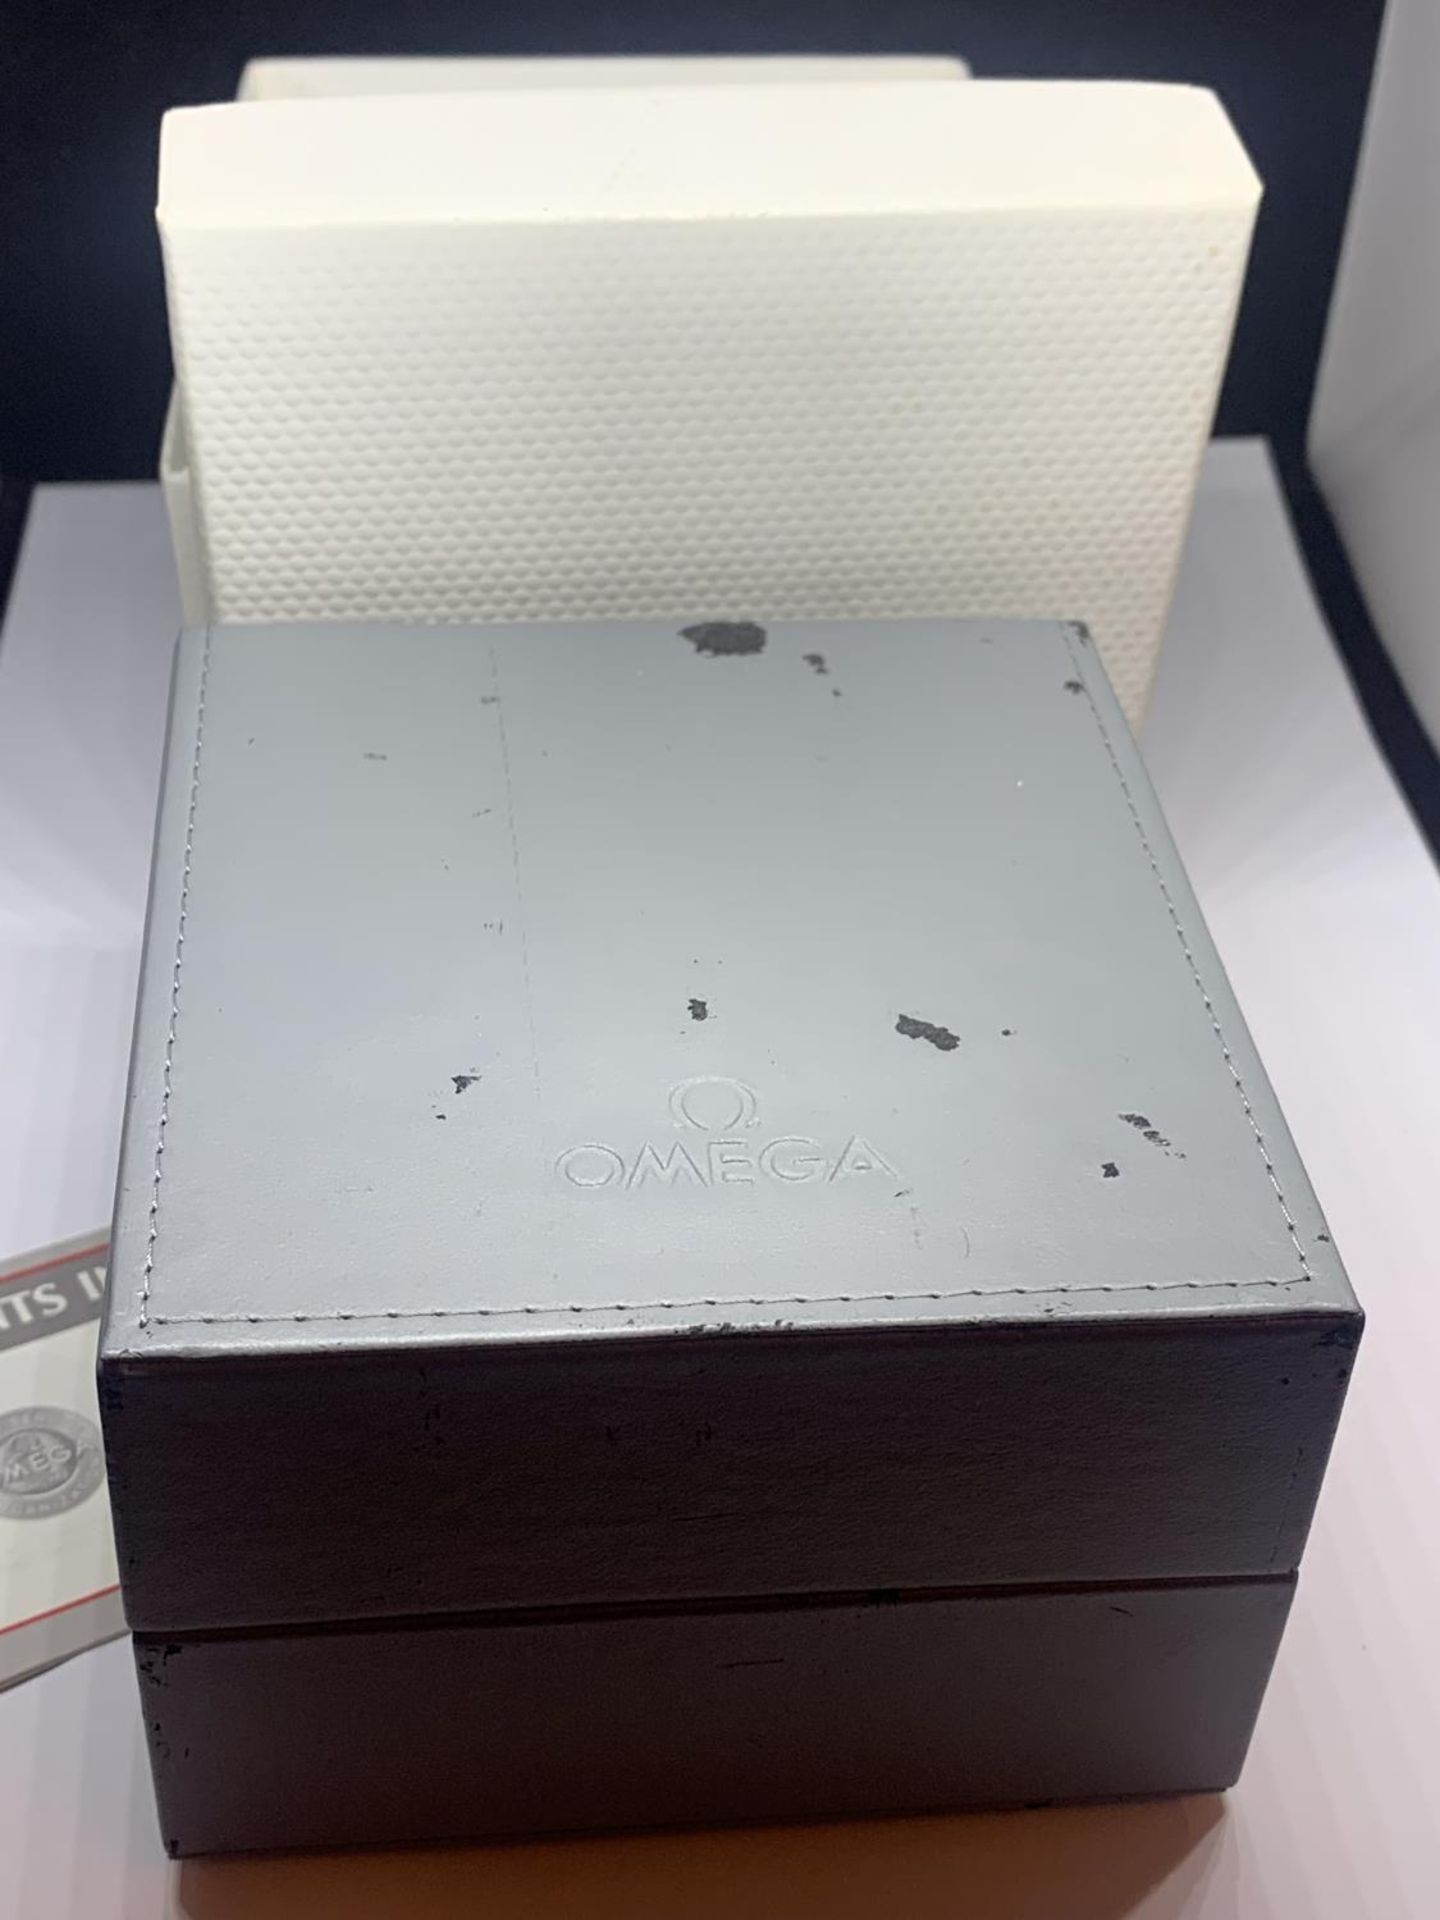 AN OMEGA AUTOMATIC GENEVE WRIST WATCH IN A PRESENTATION BOX SEEN WORKING AT TIME OF CATALOGUING - Image 4 of 4